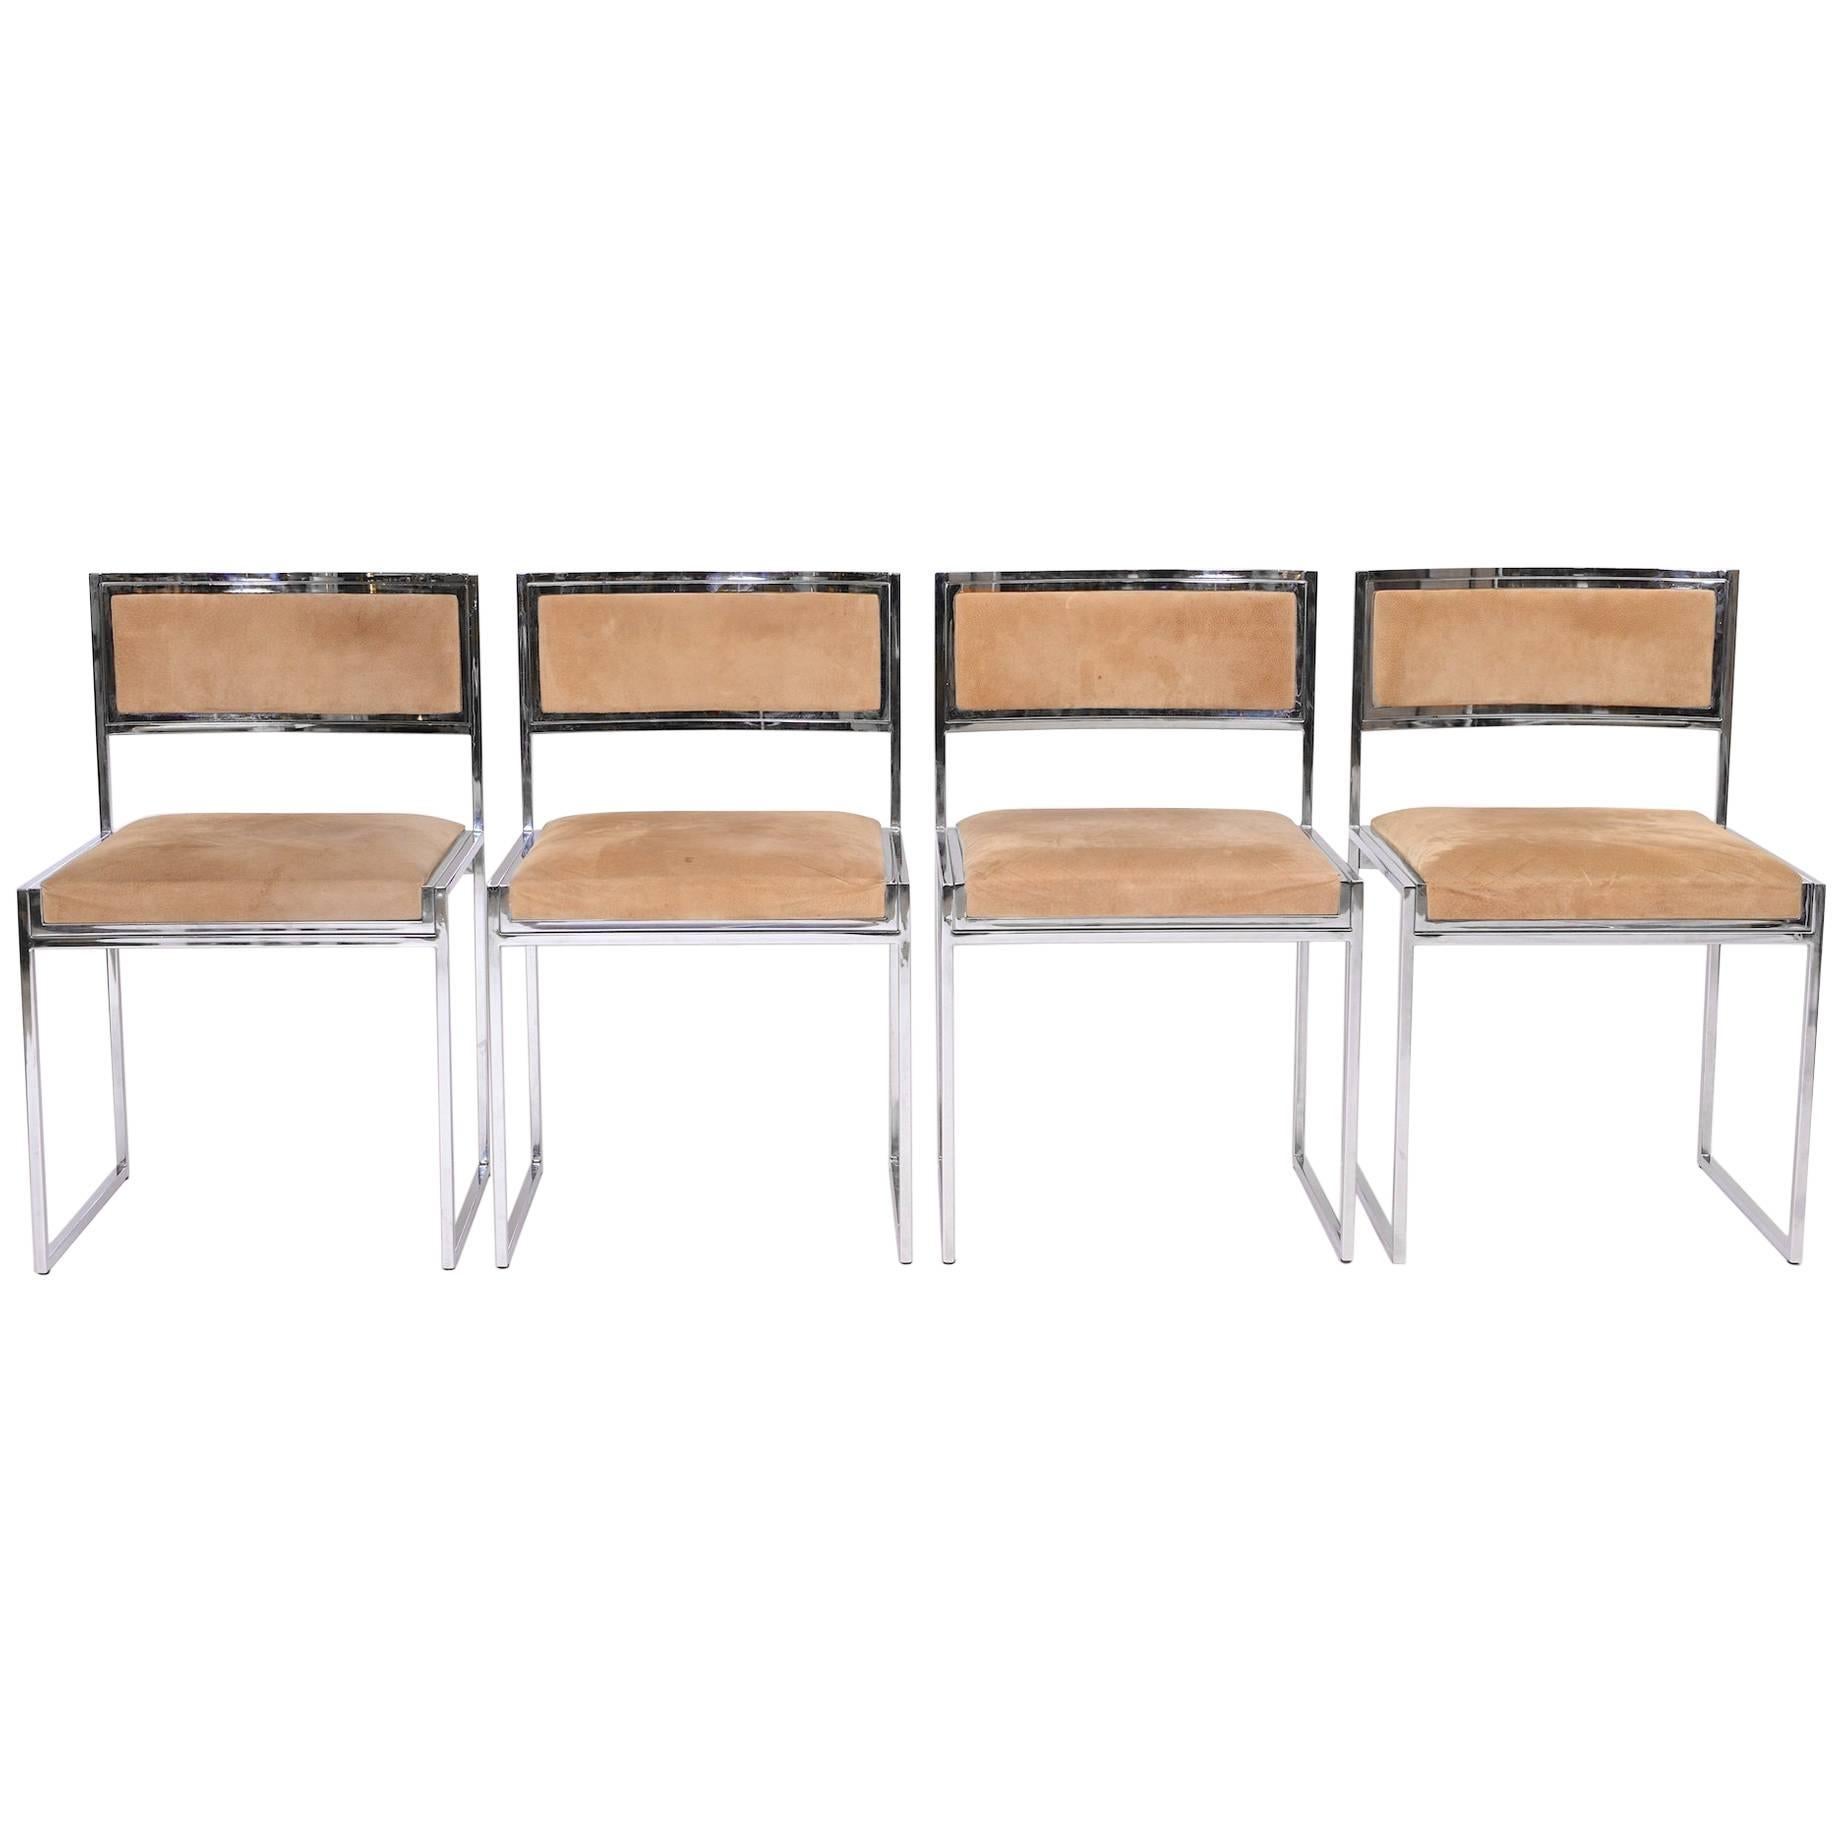 Set of four Willy Rizzo Chairs